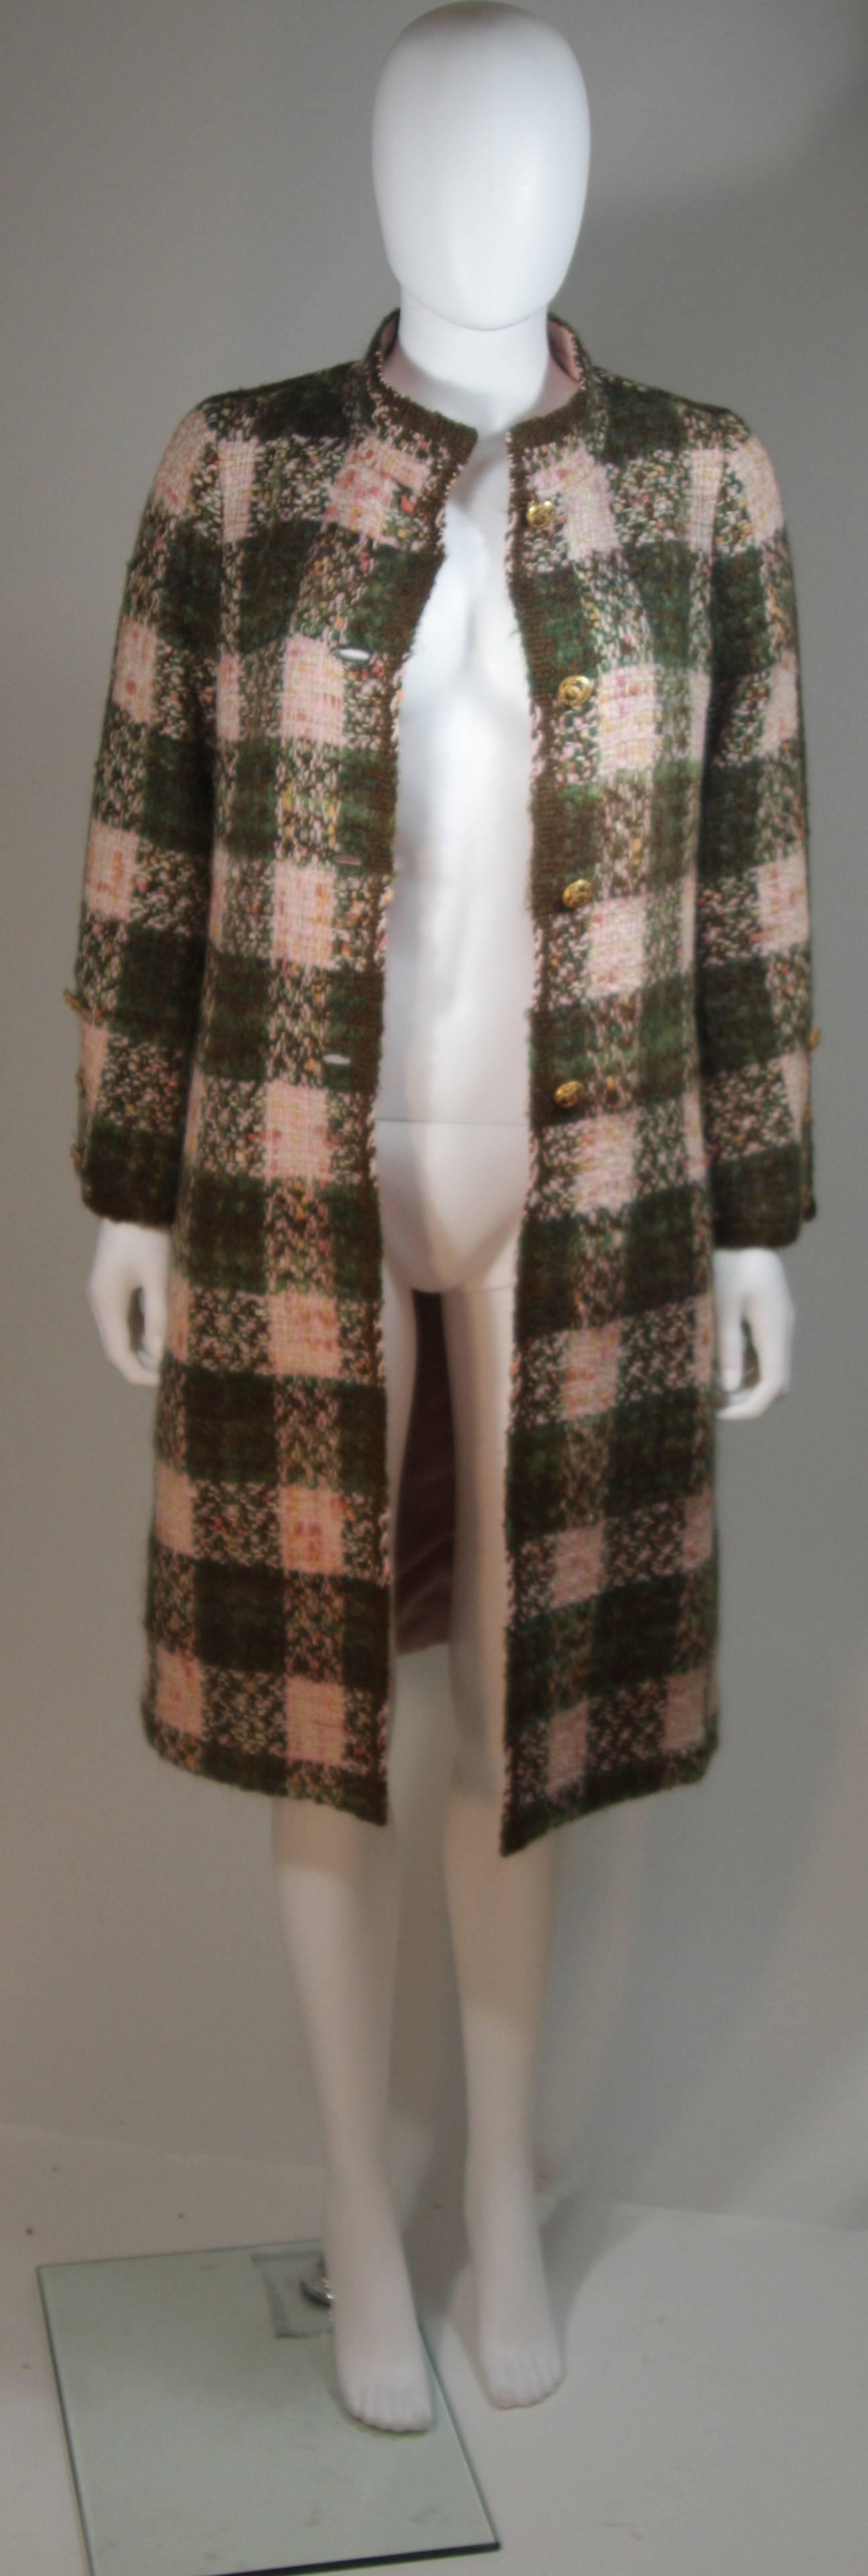 CHANEL Haute Couture Circa 1960s Green and Pink Boucle Coat Size Small 4